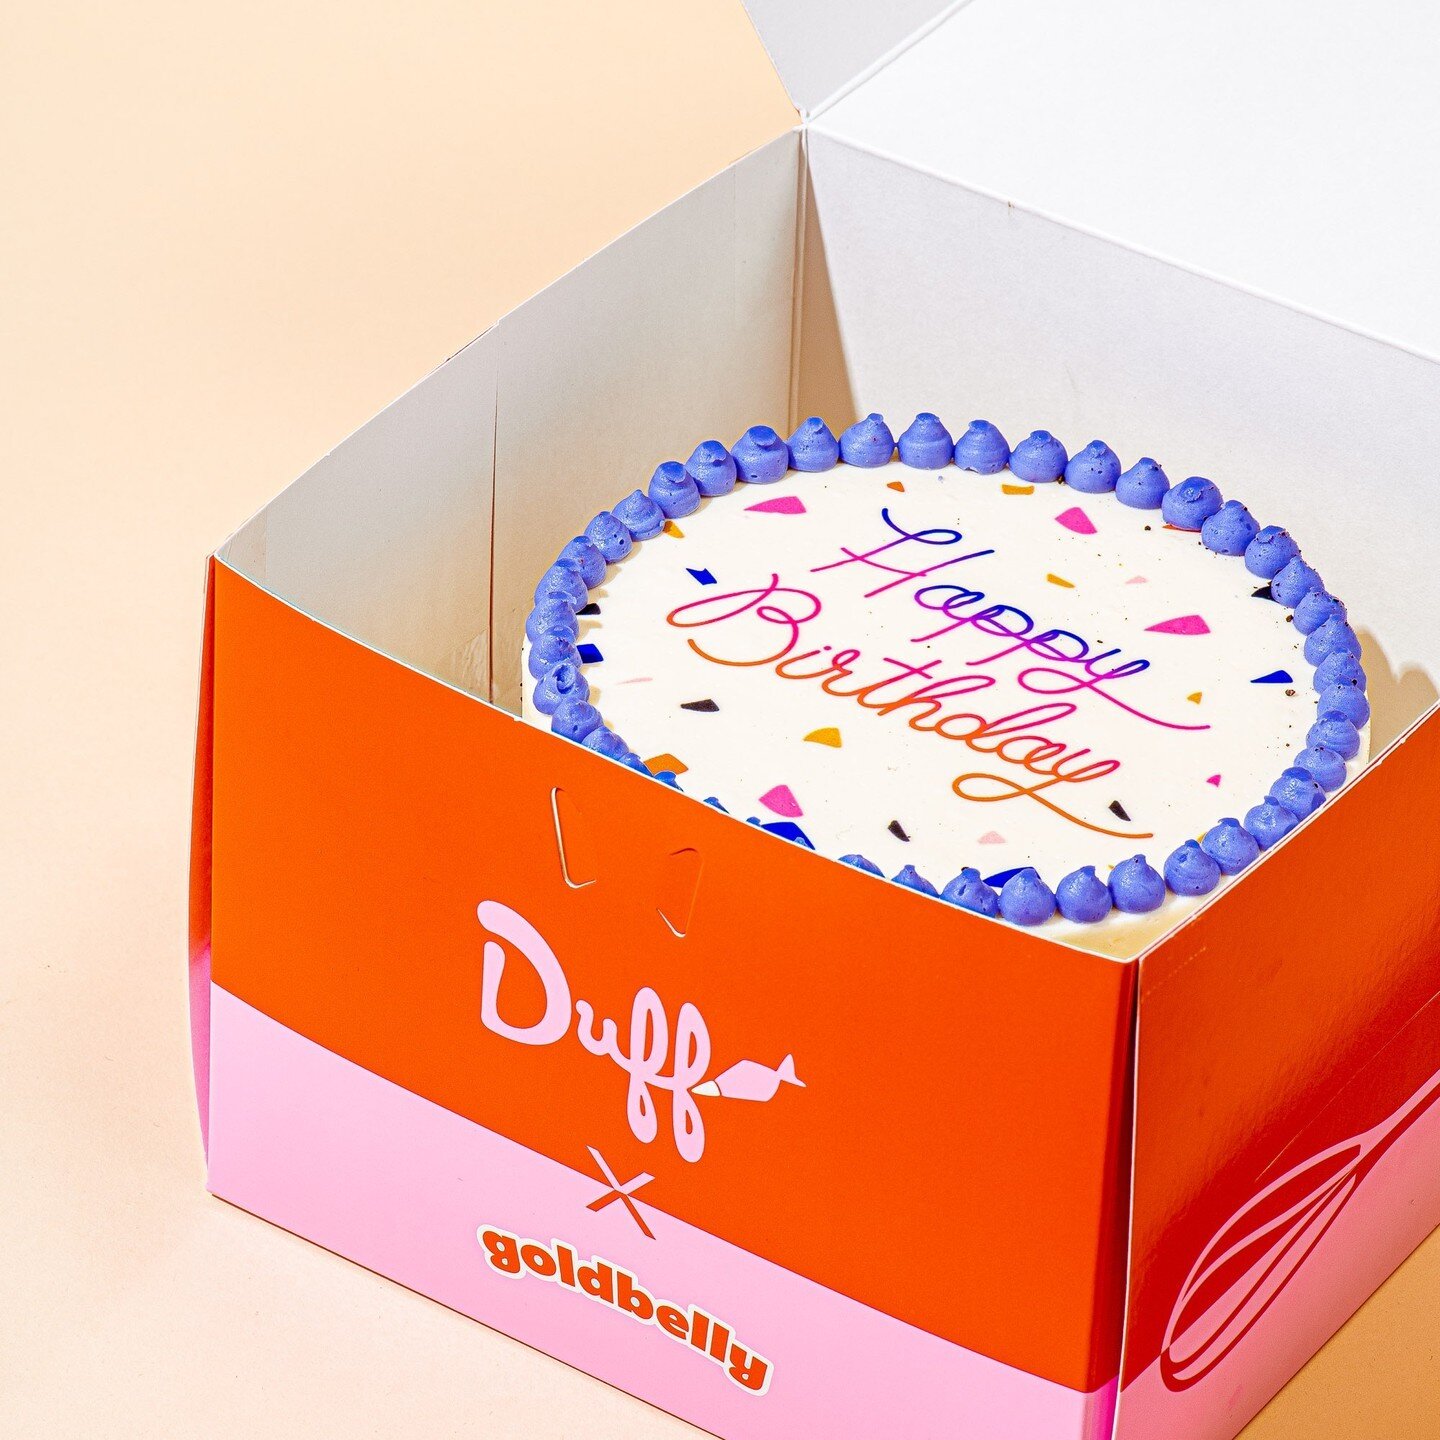 Who's got a Birthday coming up? You know you want to celebrate with this Duff x Goldbelly collaboration! Order yours today at the link below:

https://www.goldbelly.com/duff-goldman

#duffgoldman #goldbelly #yum #foodie #birthday #birthdaycake #cakef